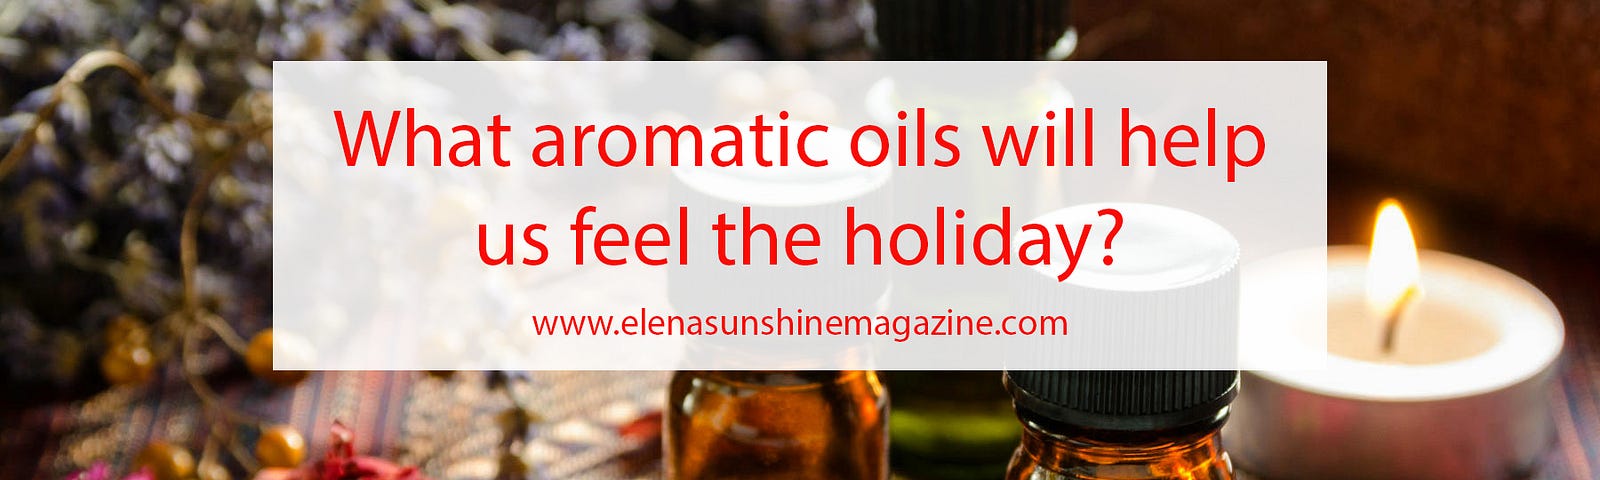 What aromatic oils will help us feel the holiday?